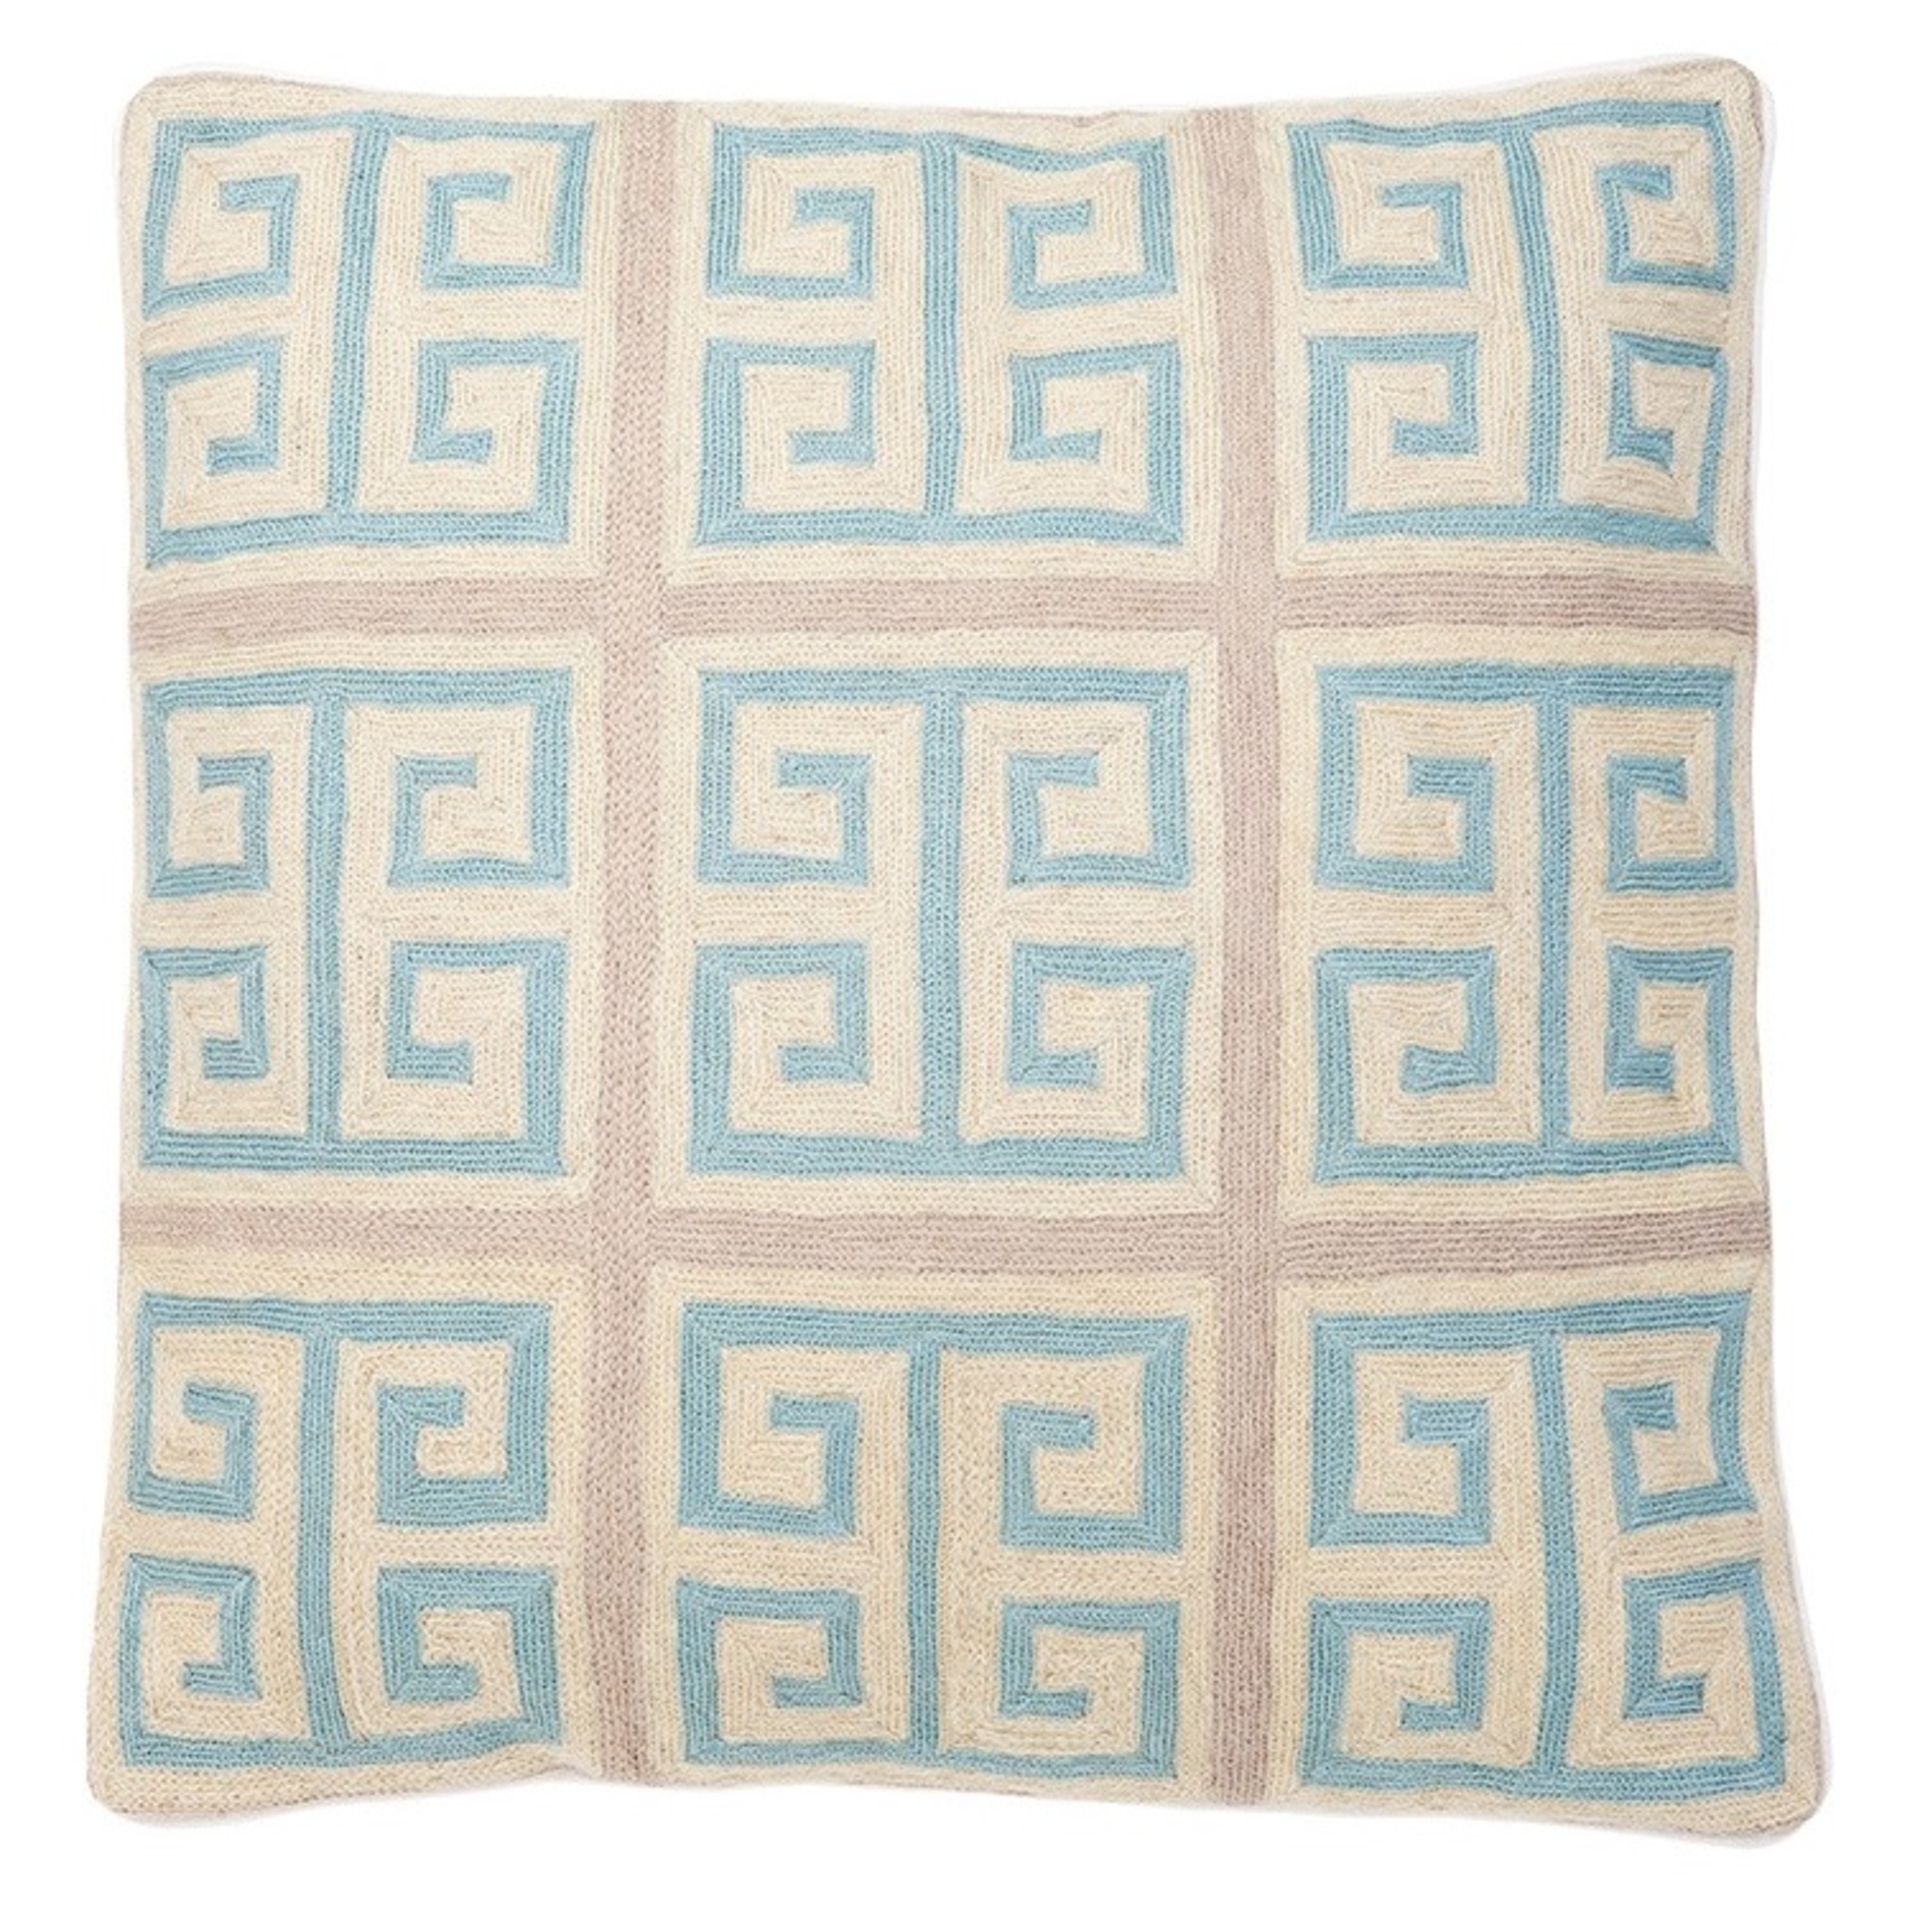 1 x EICHHOLTZ BV "Cosgrove Pillow" Cushion - In Grey And Blue. -  50x50cm Aw14 - Ref: 4551293B - - Image 4 of 4